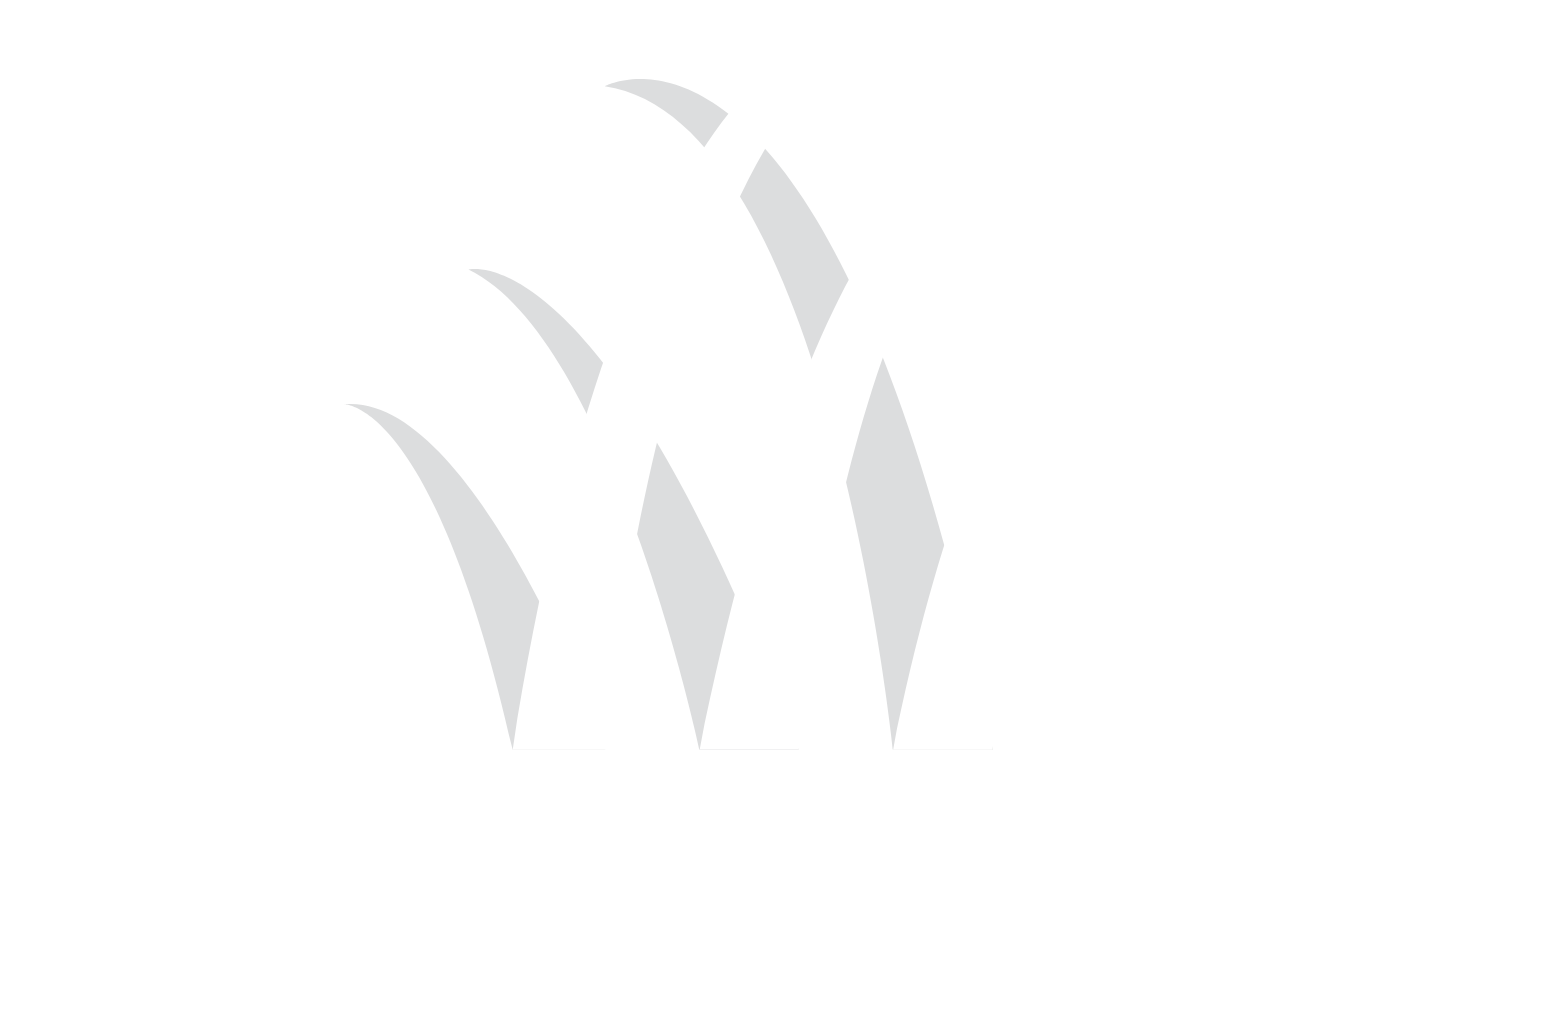 National Company for Learning and Education Logo groß für dunkle Hintergründe (transparentes PNG)